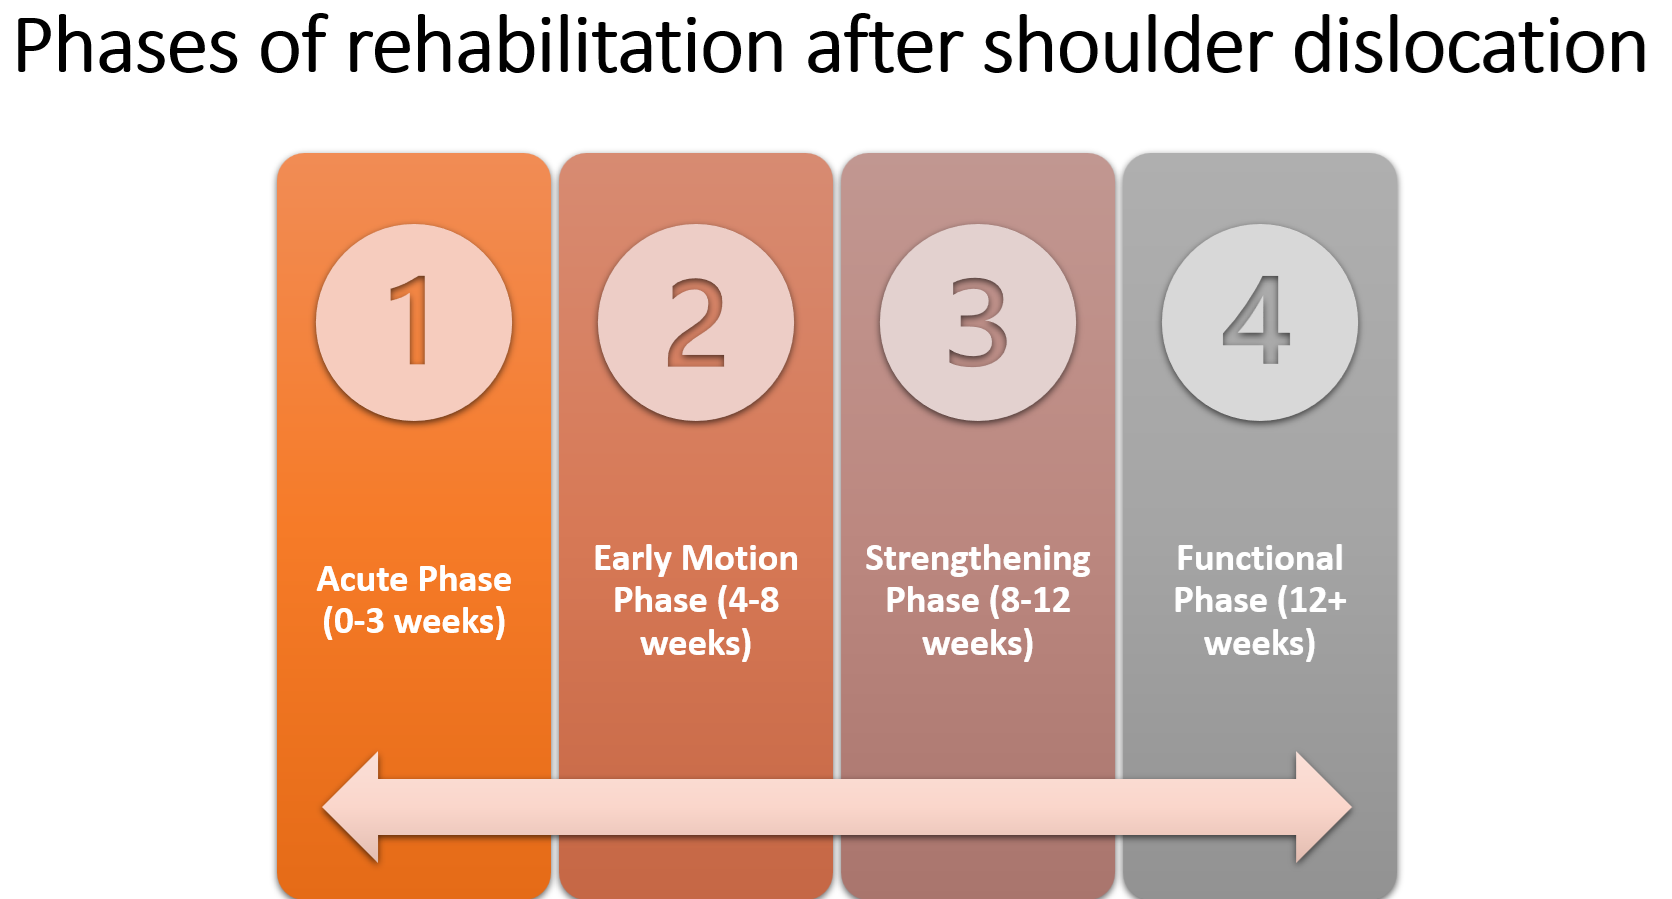 Phases of rehabilitation after shoulder dislocation